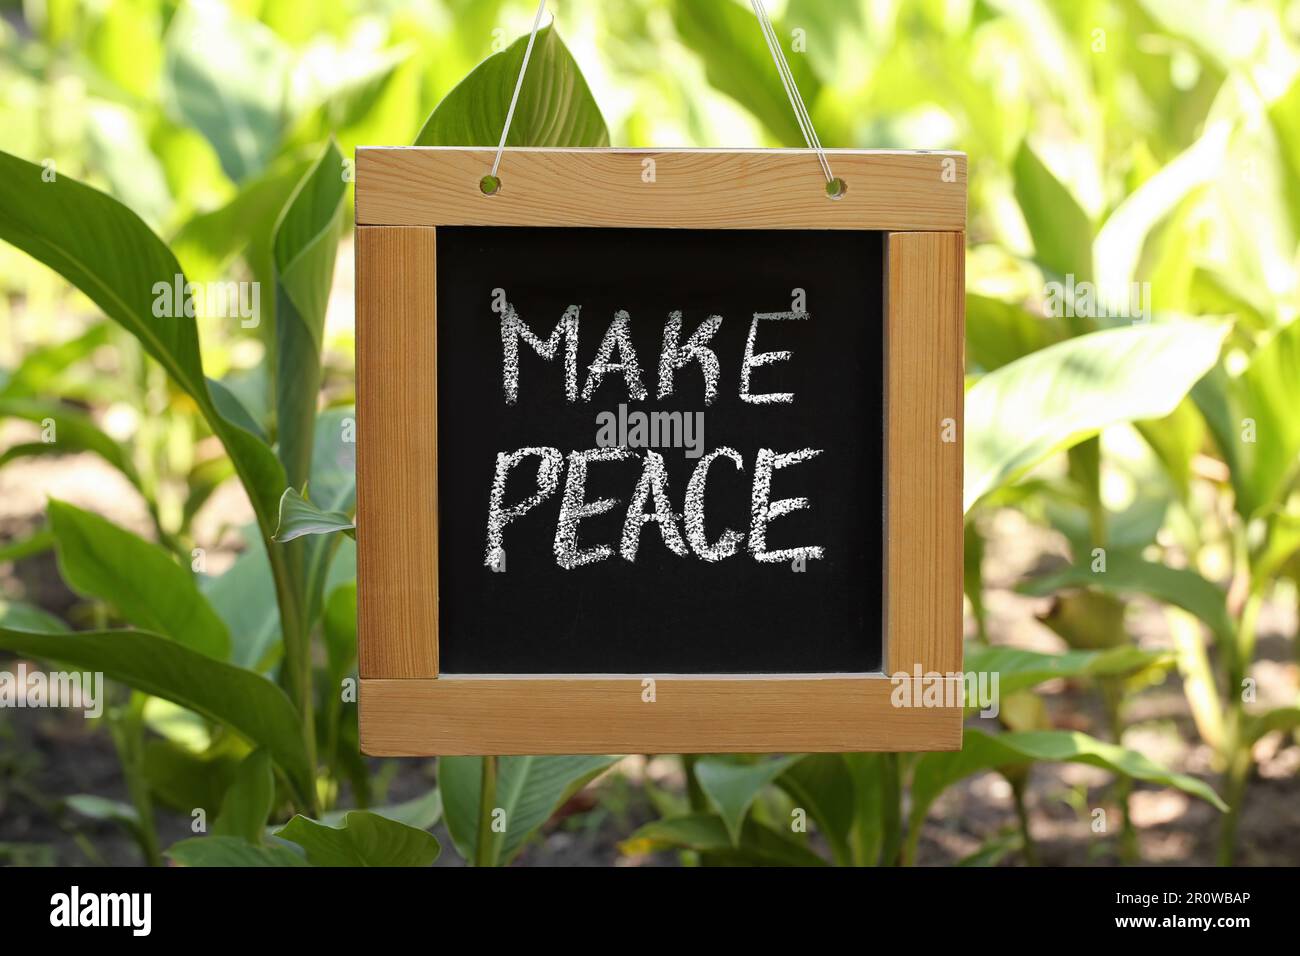 Chalkboard with phrase Make Peace in garden outdoors Stock Photo